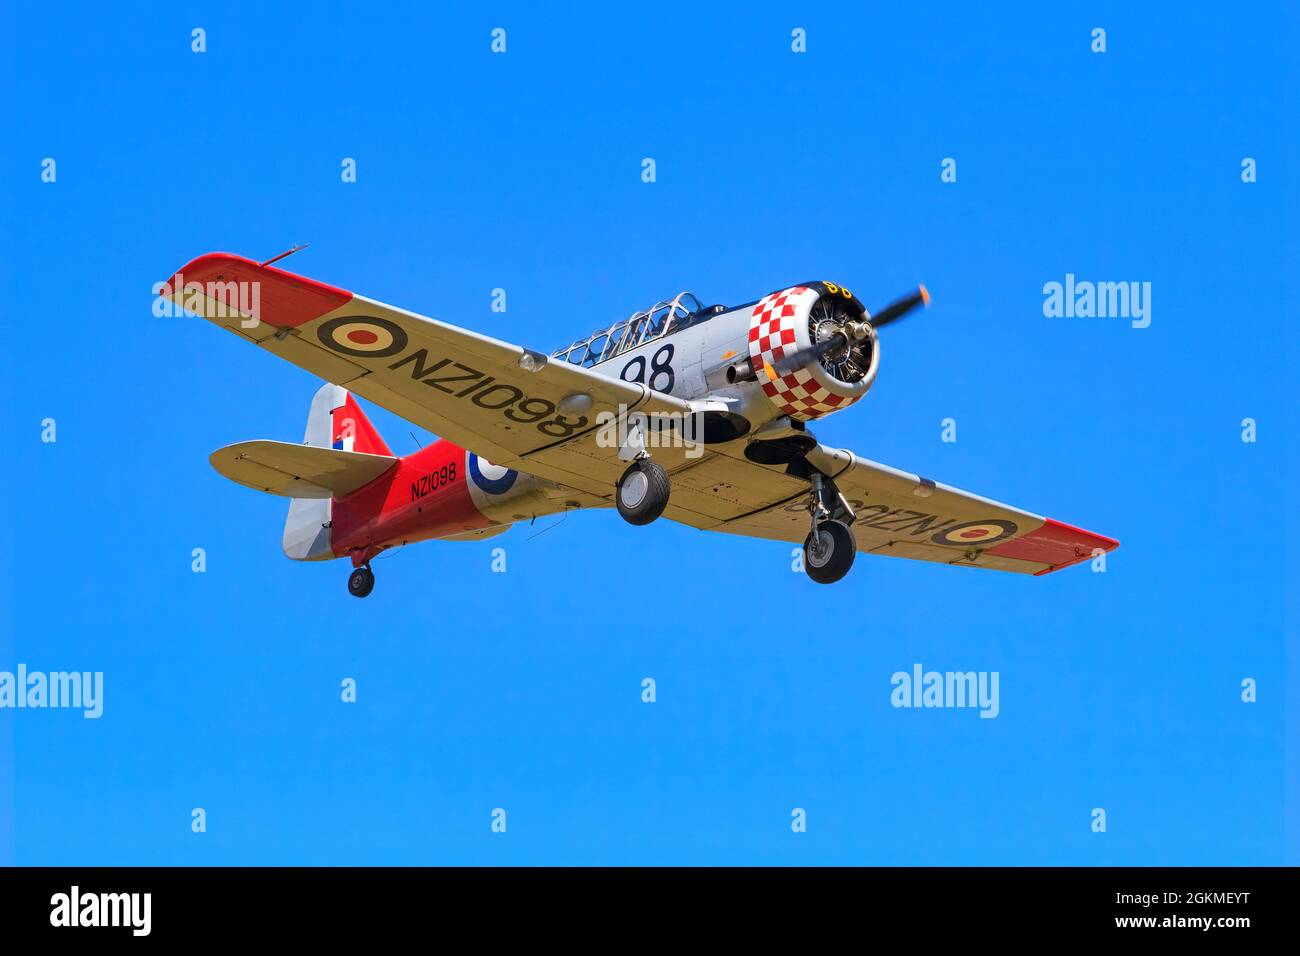 A North American Aviation T-6 Texan (aka Harvard), a WW2 training plane, flying at an airshow in New Zealand Stock Photo